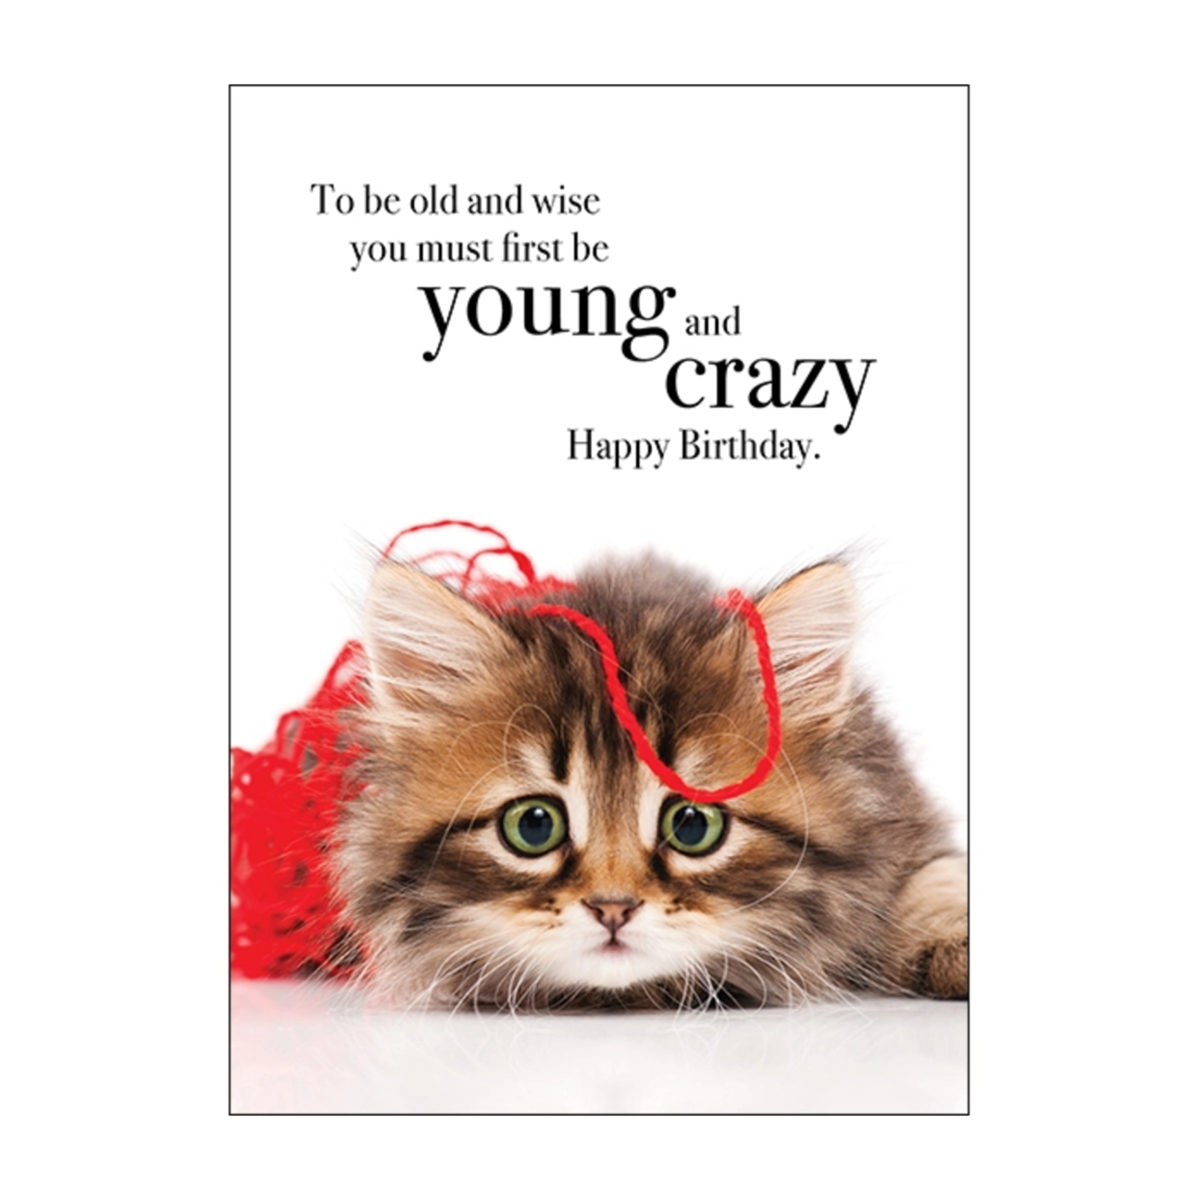 Young and Crazy Animal Birthday Card